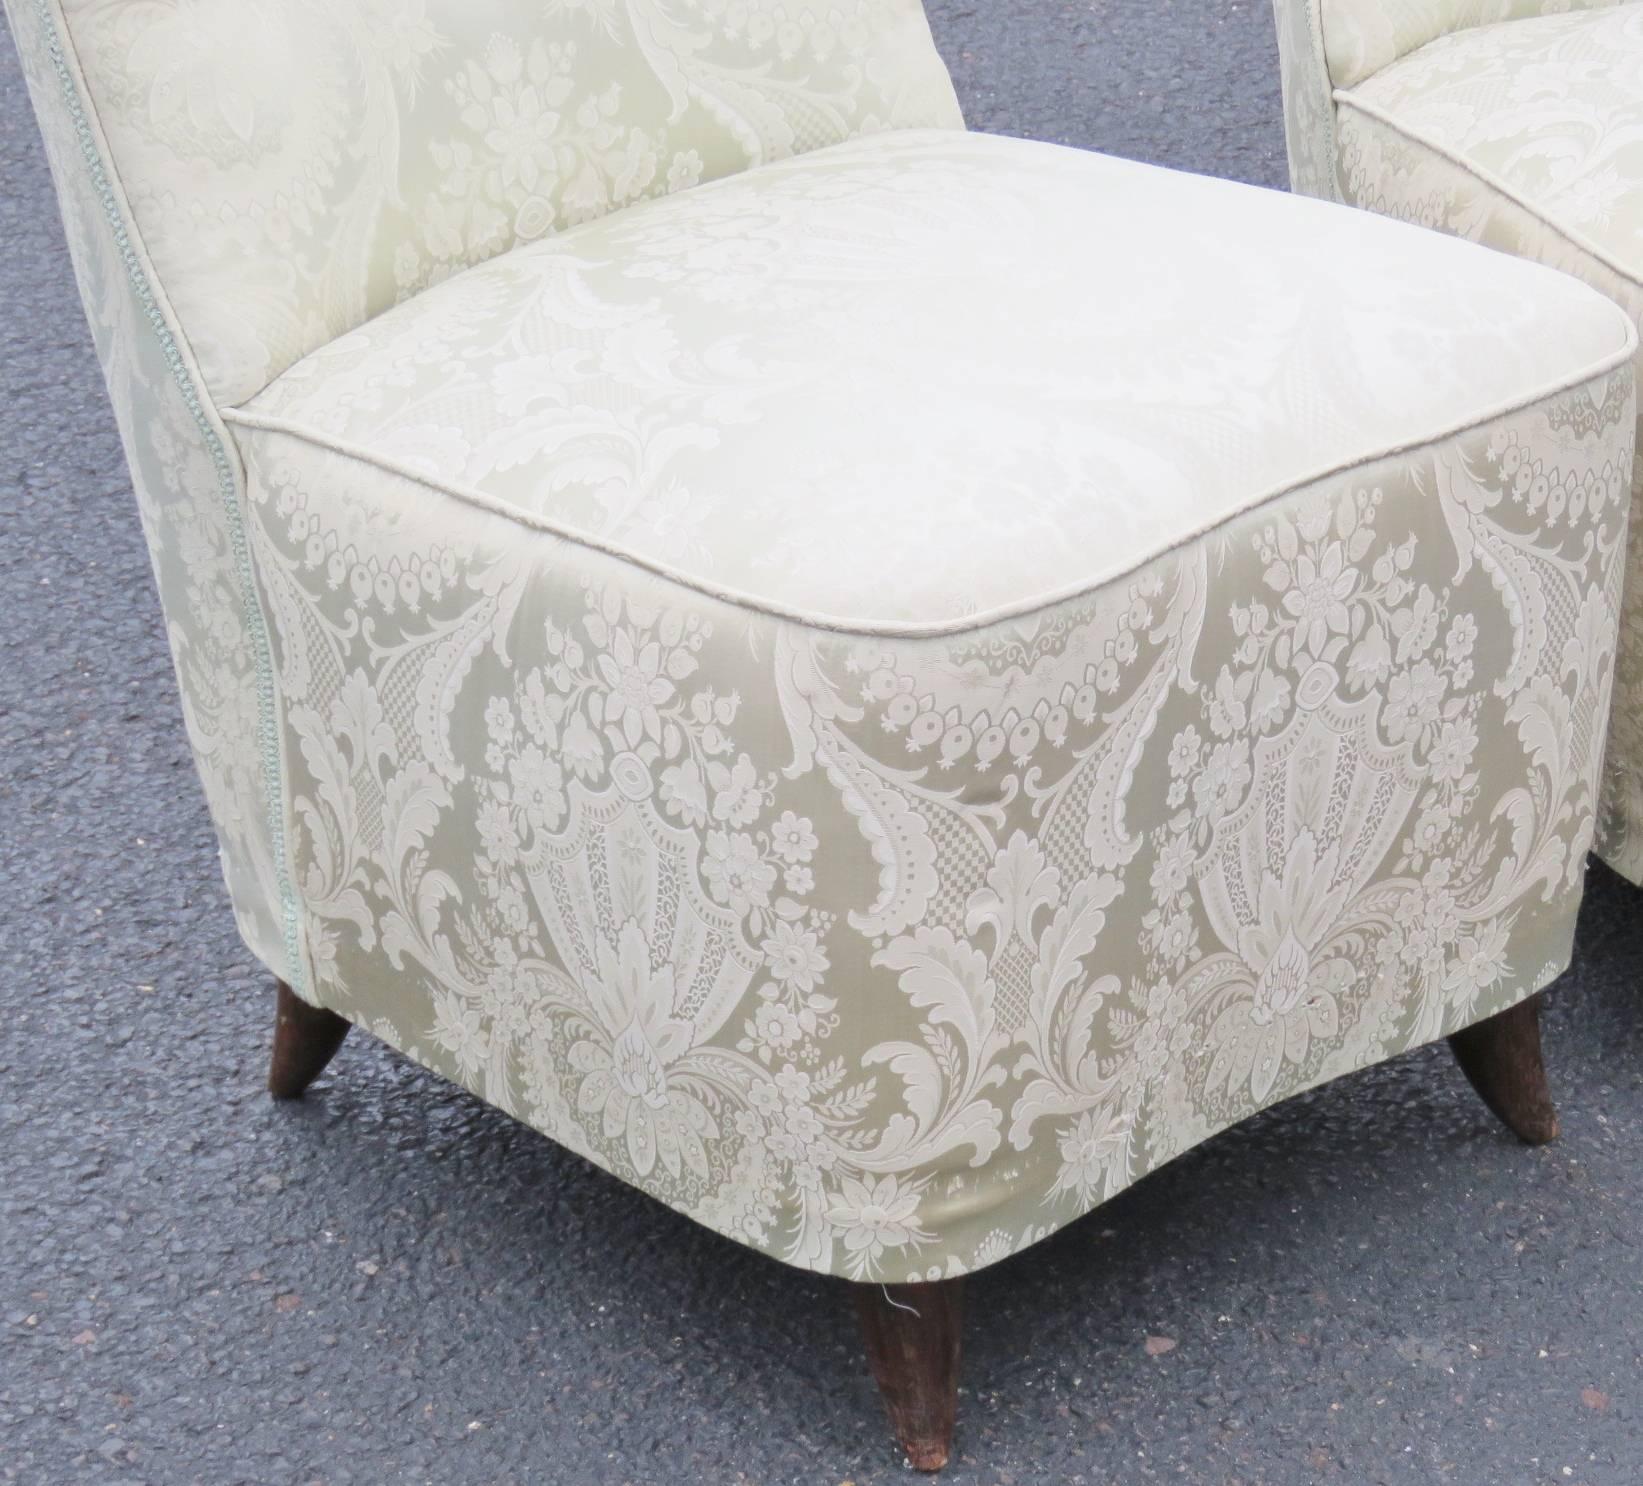 20th Century Pair of Buffa Tufted Upholstered Slipper Chairs